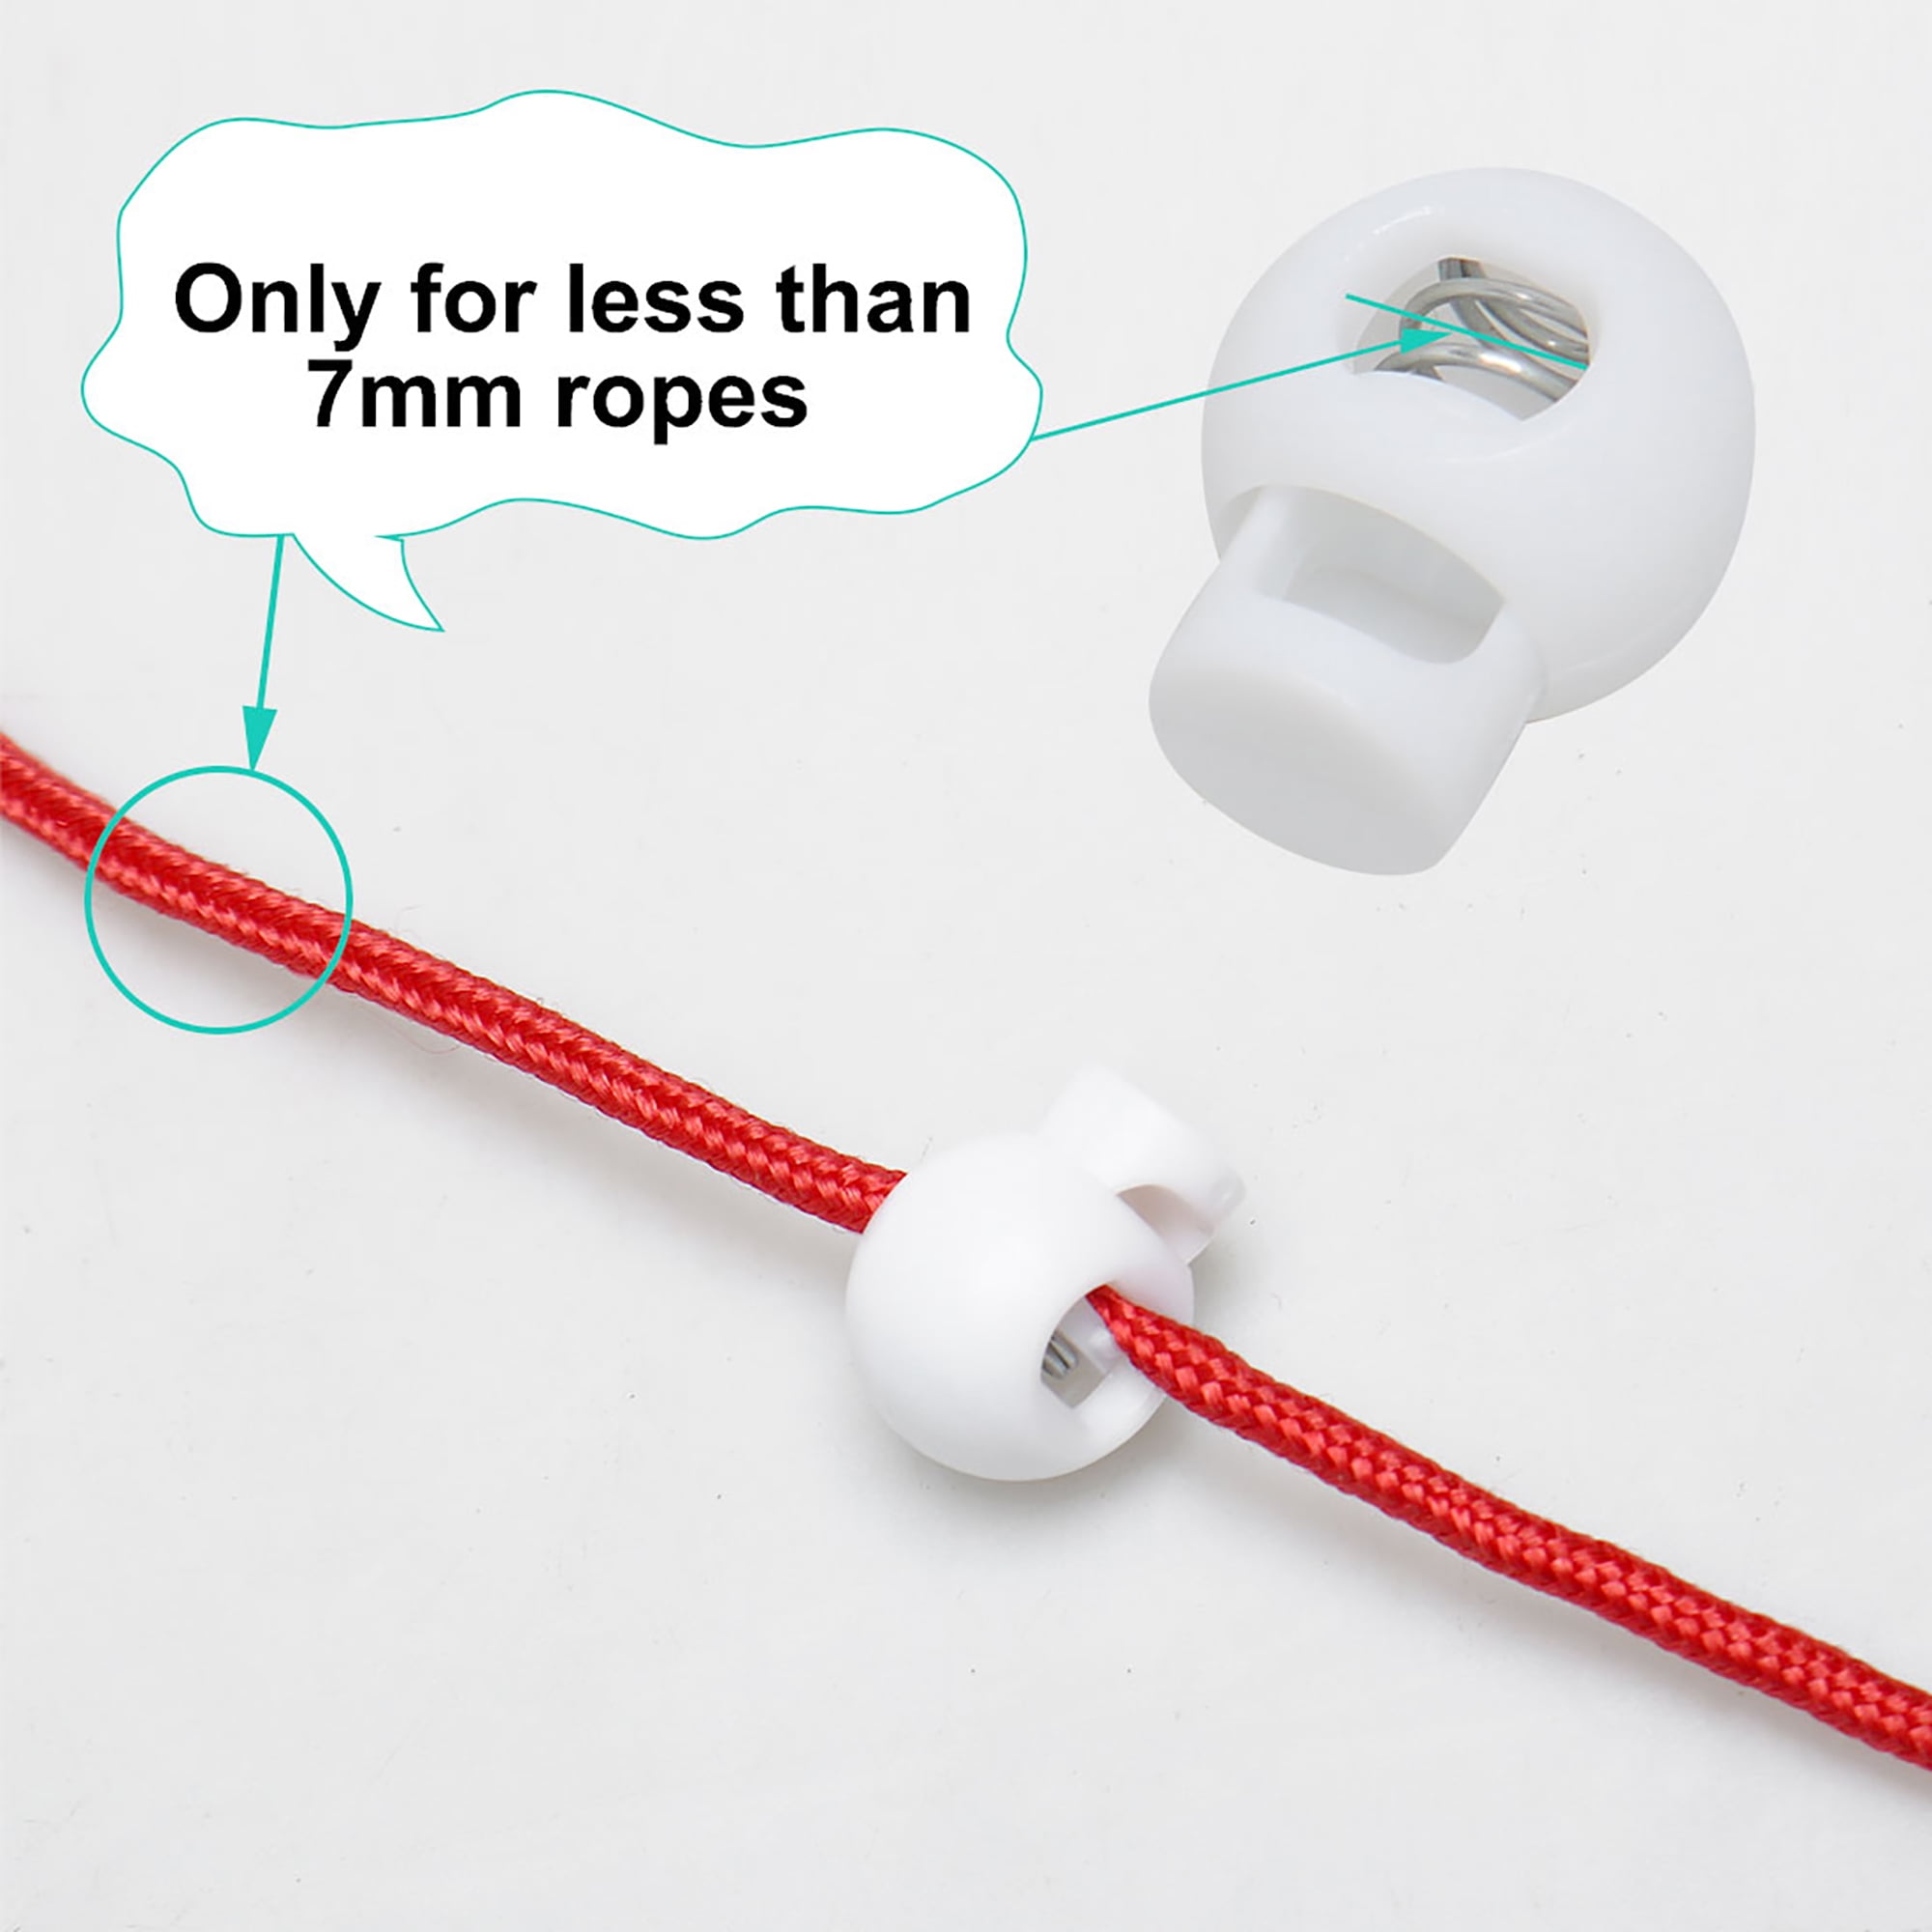 uxcell 6pcs Plastic Cord Locks Stopper End Spring Stop Single Hole Toggle Fastener Stopper Rope End for Drawstrings Clothing Bags Shoelaces Camping White 